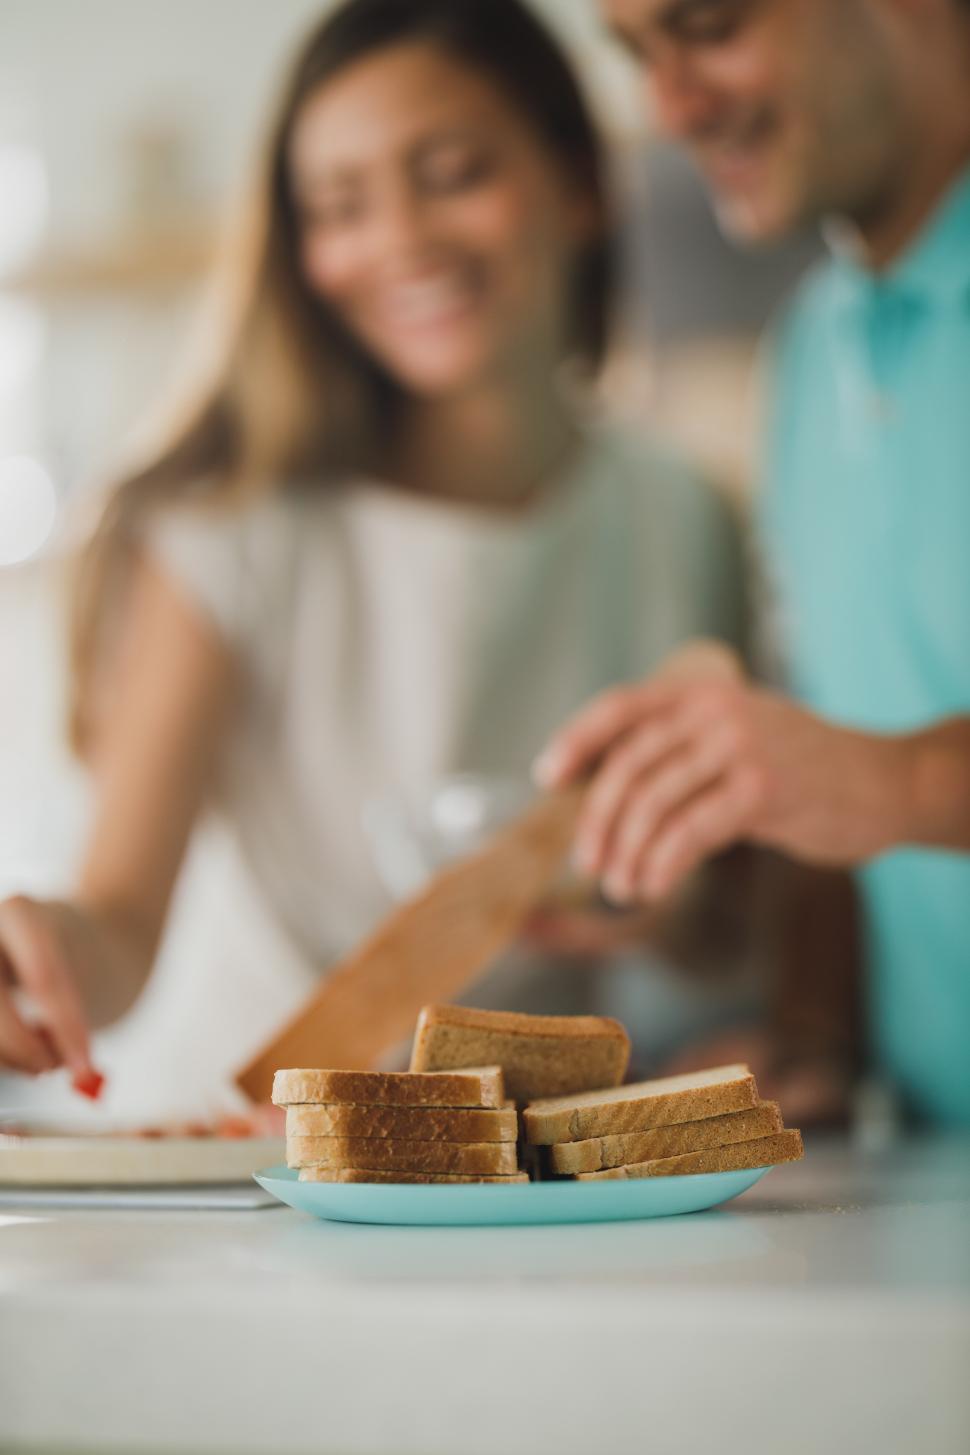 Free Image of Slices of toast bread and couple in kitchen 